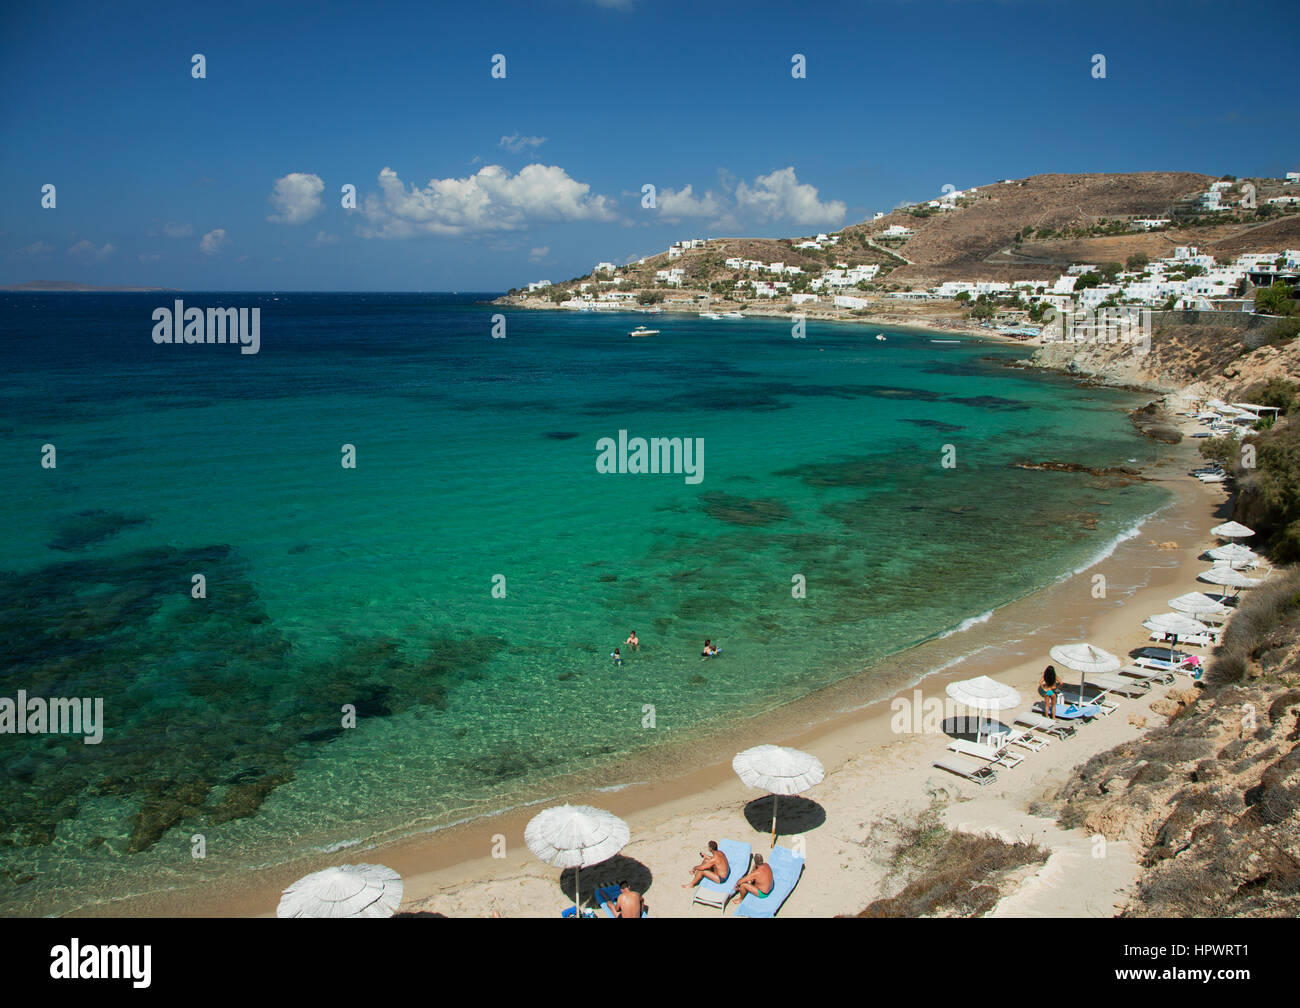 Agios Ioannis Mykonos High Resolution Stock Photography and Images - Alamy